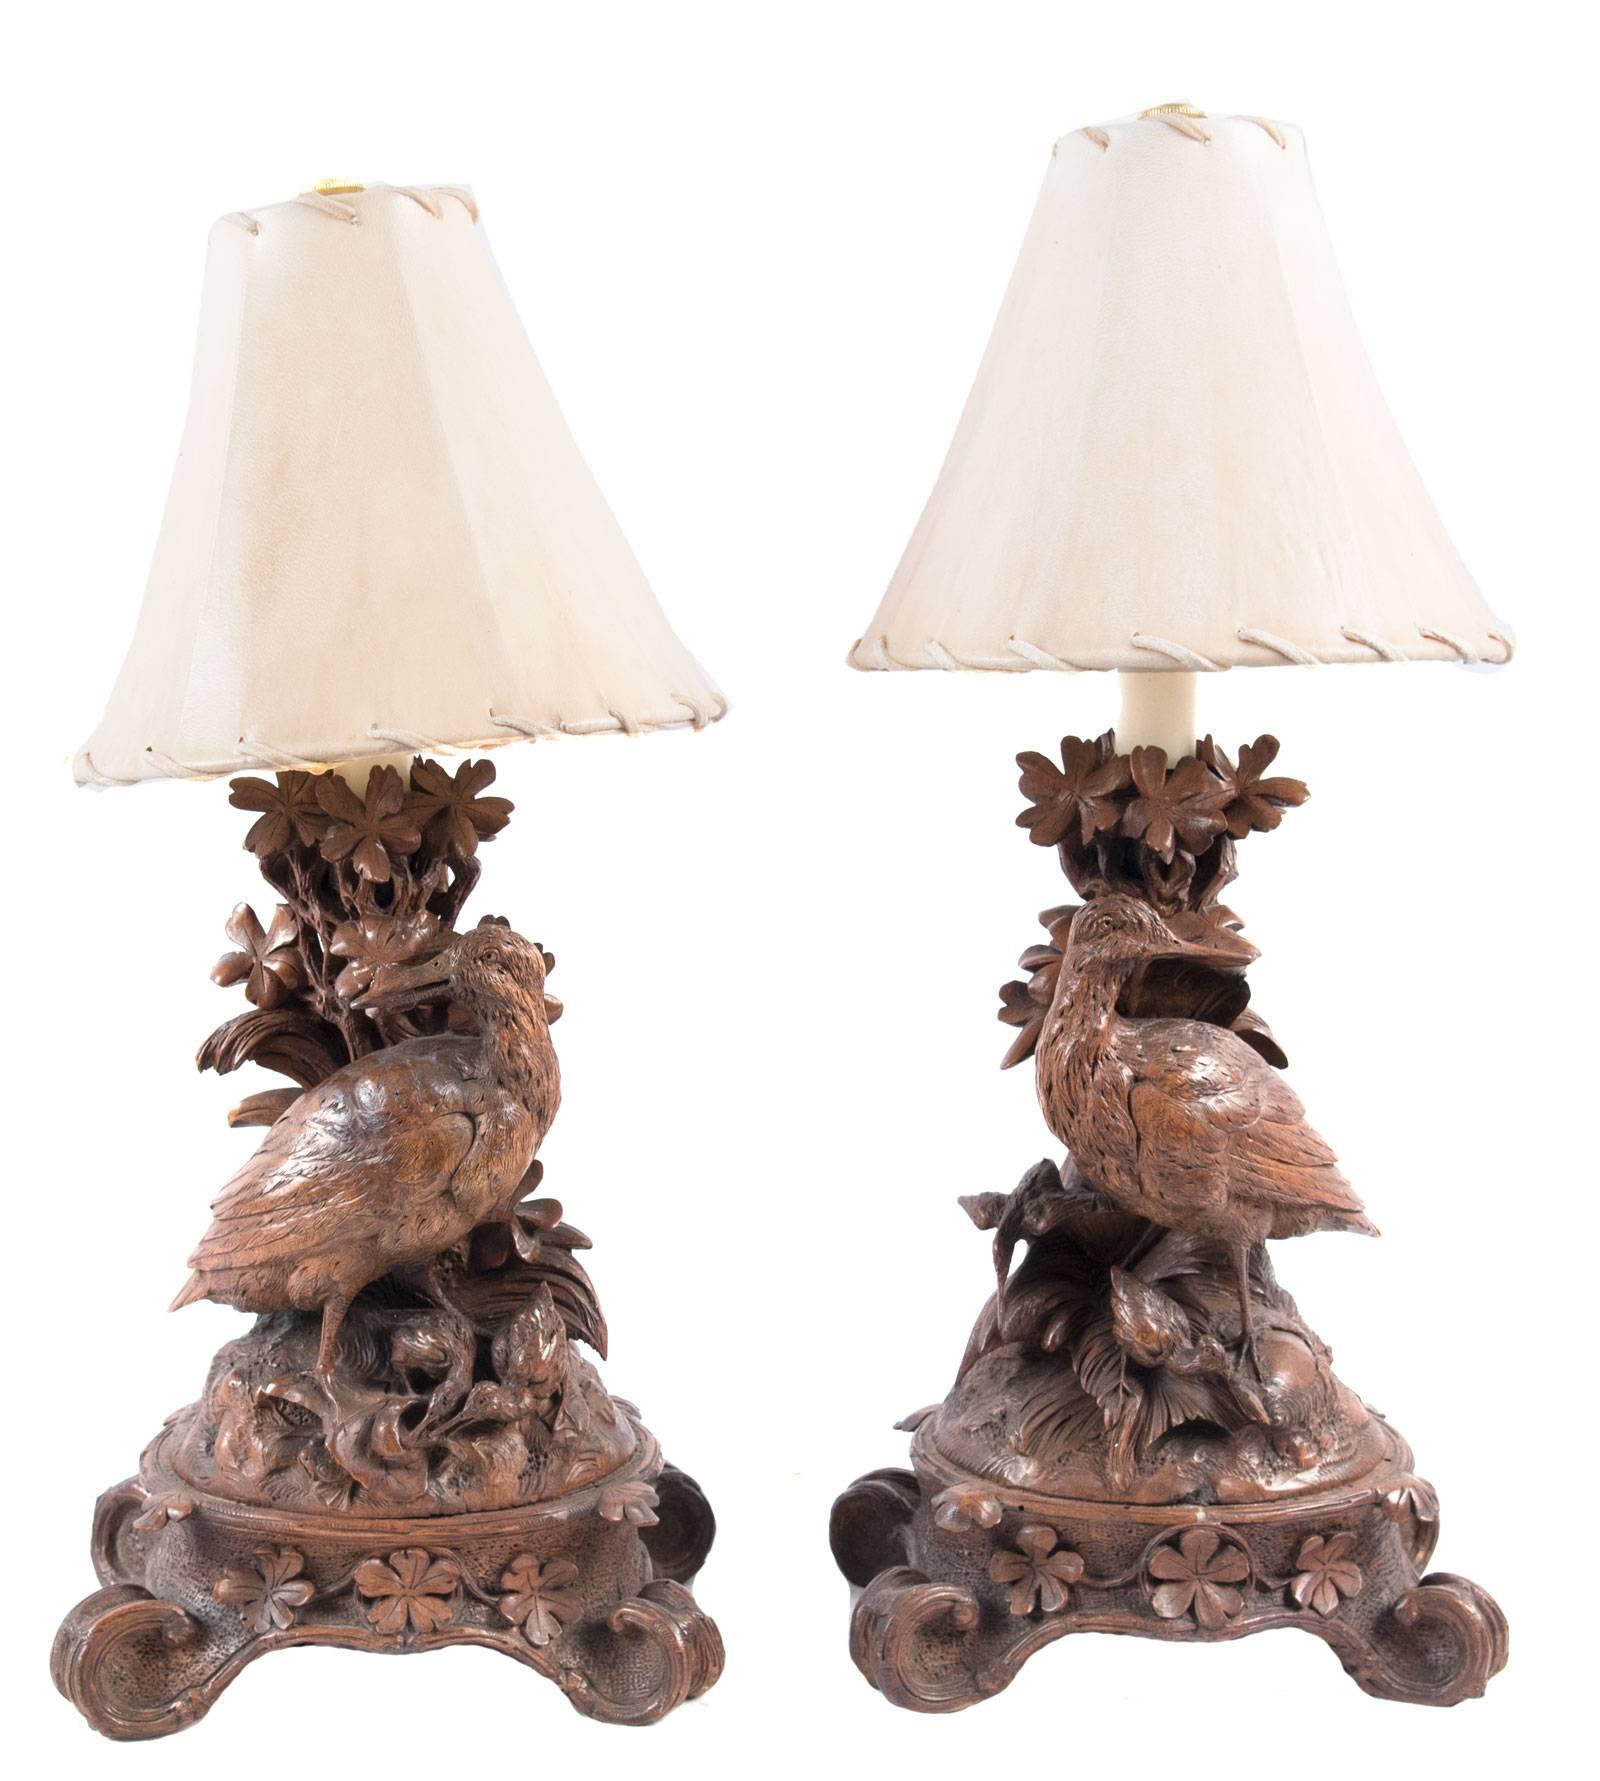 A pair of elaborately carved wood table lamps in the Black Forest style popular in the late nineteenth century. Opposing pheasants are perched on rocky ground, against a trunk, foliage and pinecones, the figures on a similarly carved base and topped